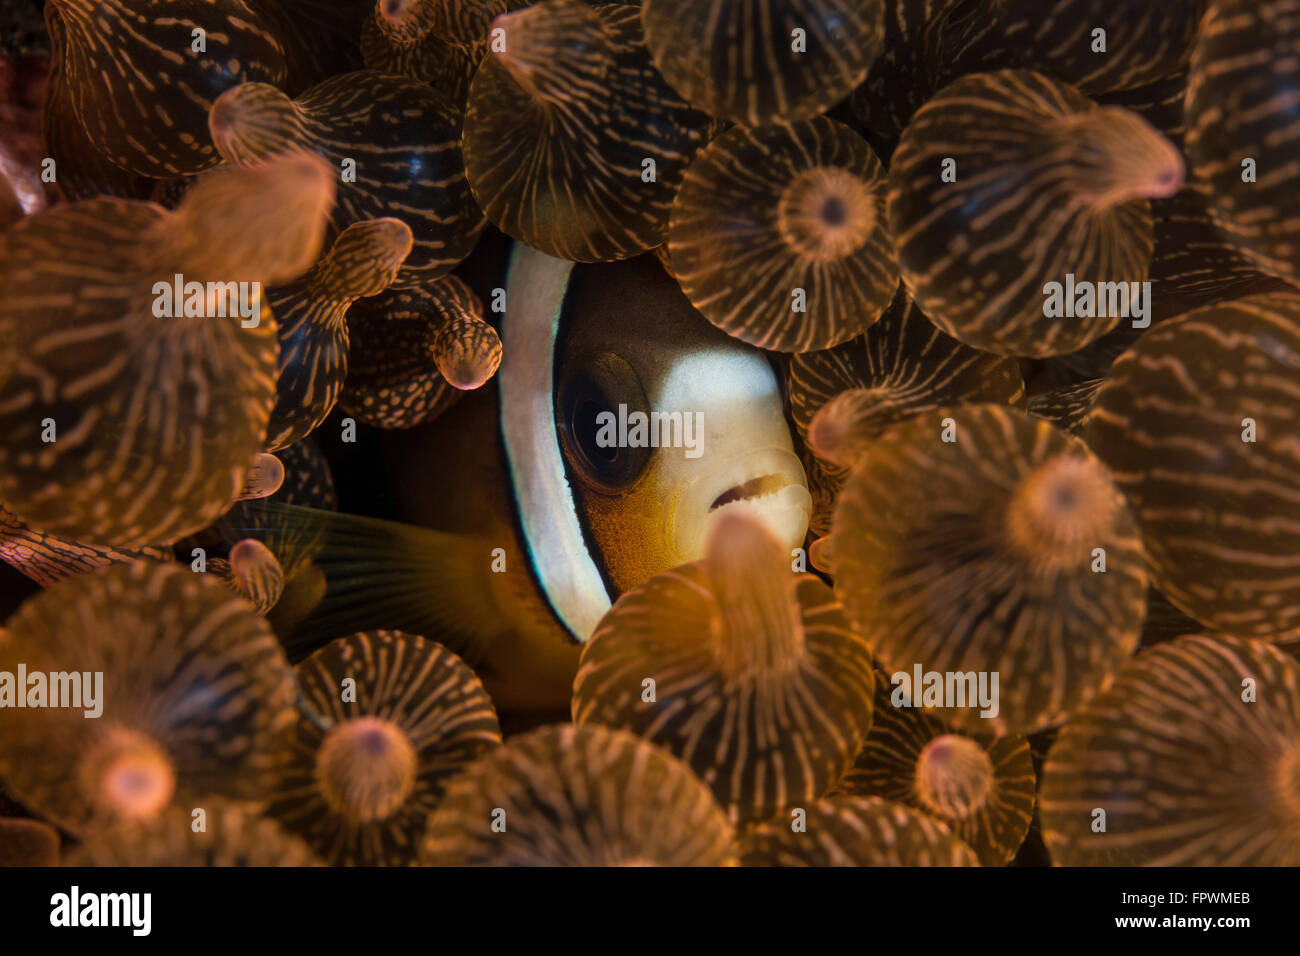 A Clark's anemonefish (Amphiprion clarkii) snuggles into the tentacles of its host anemone in Komodo National Park, Indonesia. T Stock Photo